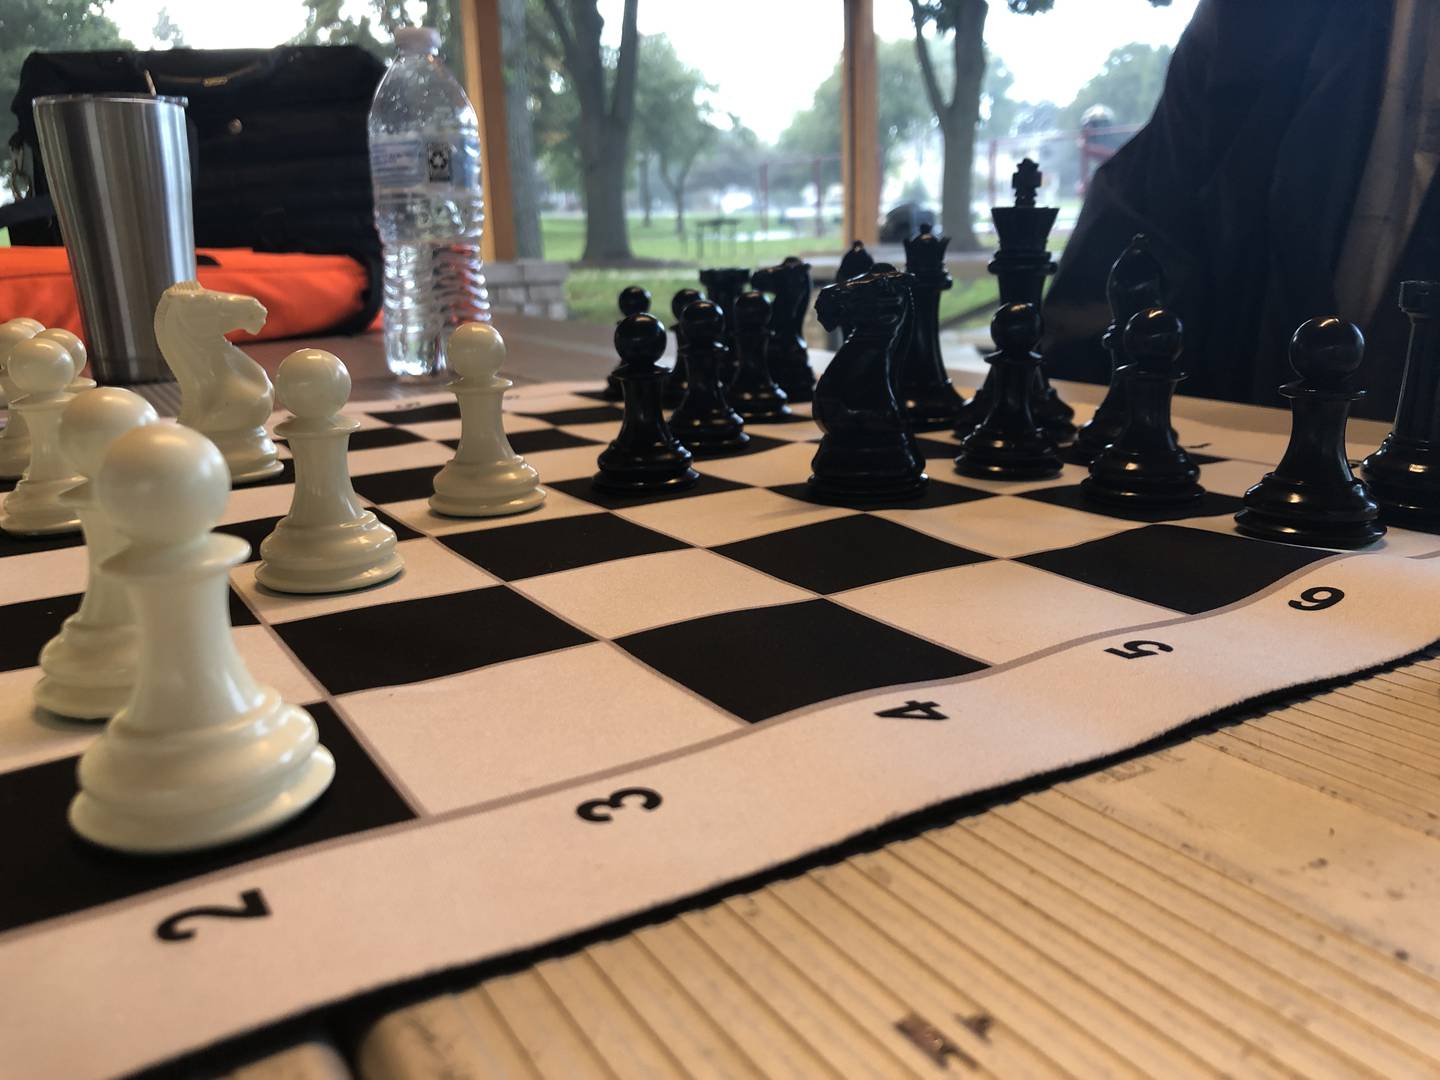 Jeff Vada and Jeff Coleman are among the players who set up their chess game at McHenry's Veterans Memorial Park on Tuesday, Sept. 20, 2022. The group of players is seeking an indoor spot now.